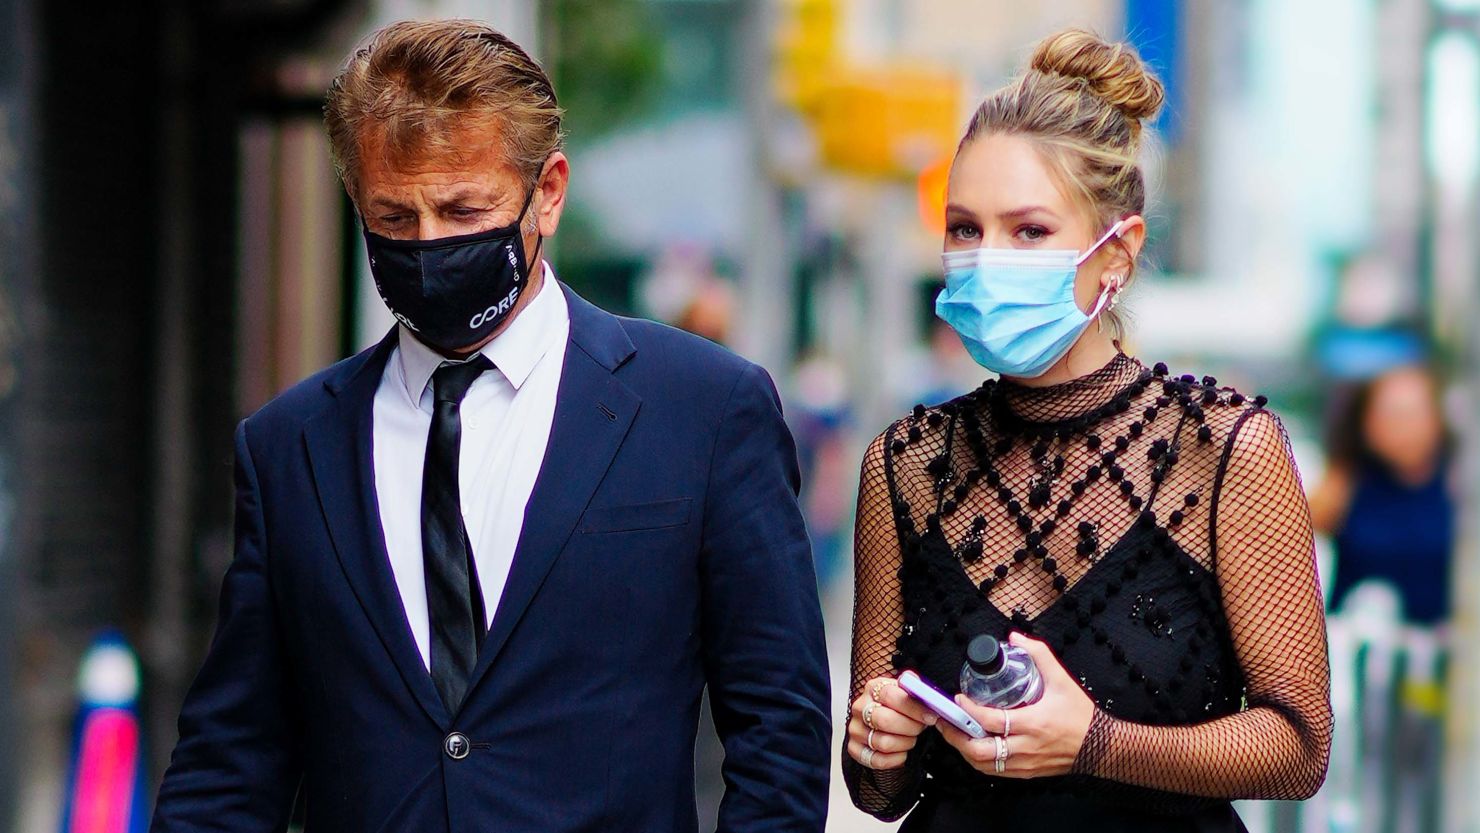 NEW YORK, NEW YORK - AUGUST 19: Sean Penn and Dylan Penn arrive at The Late Show with Stephen Colbert studios on August 19, 2021 in New York City. (Photo by Gotham/GC Images)